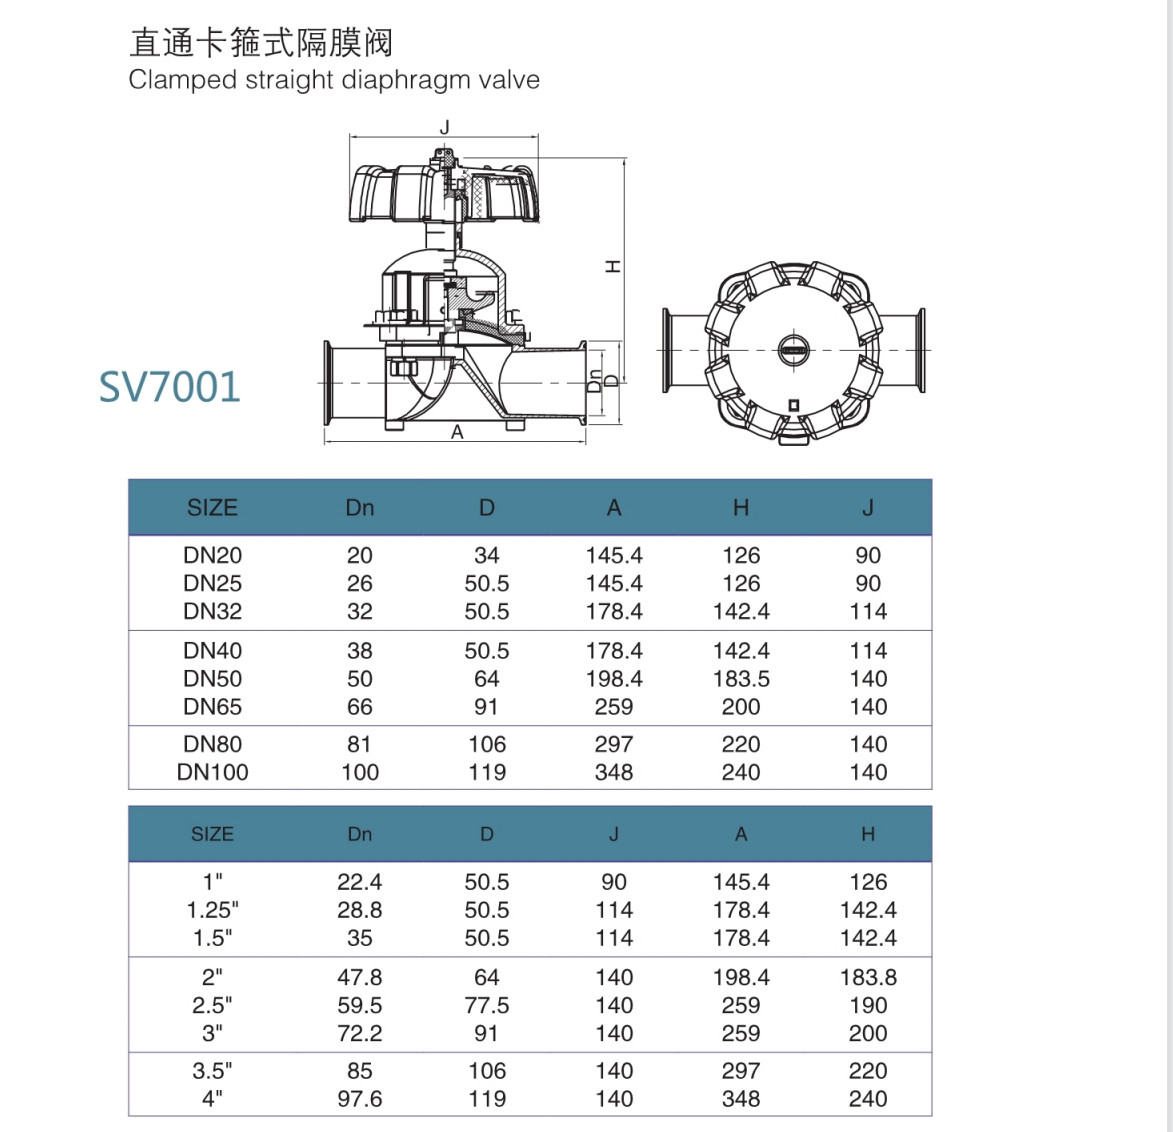 drawing-for-clamp-diaphragm-valve